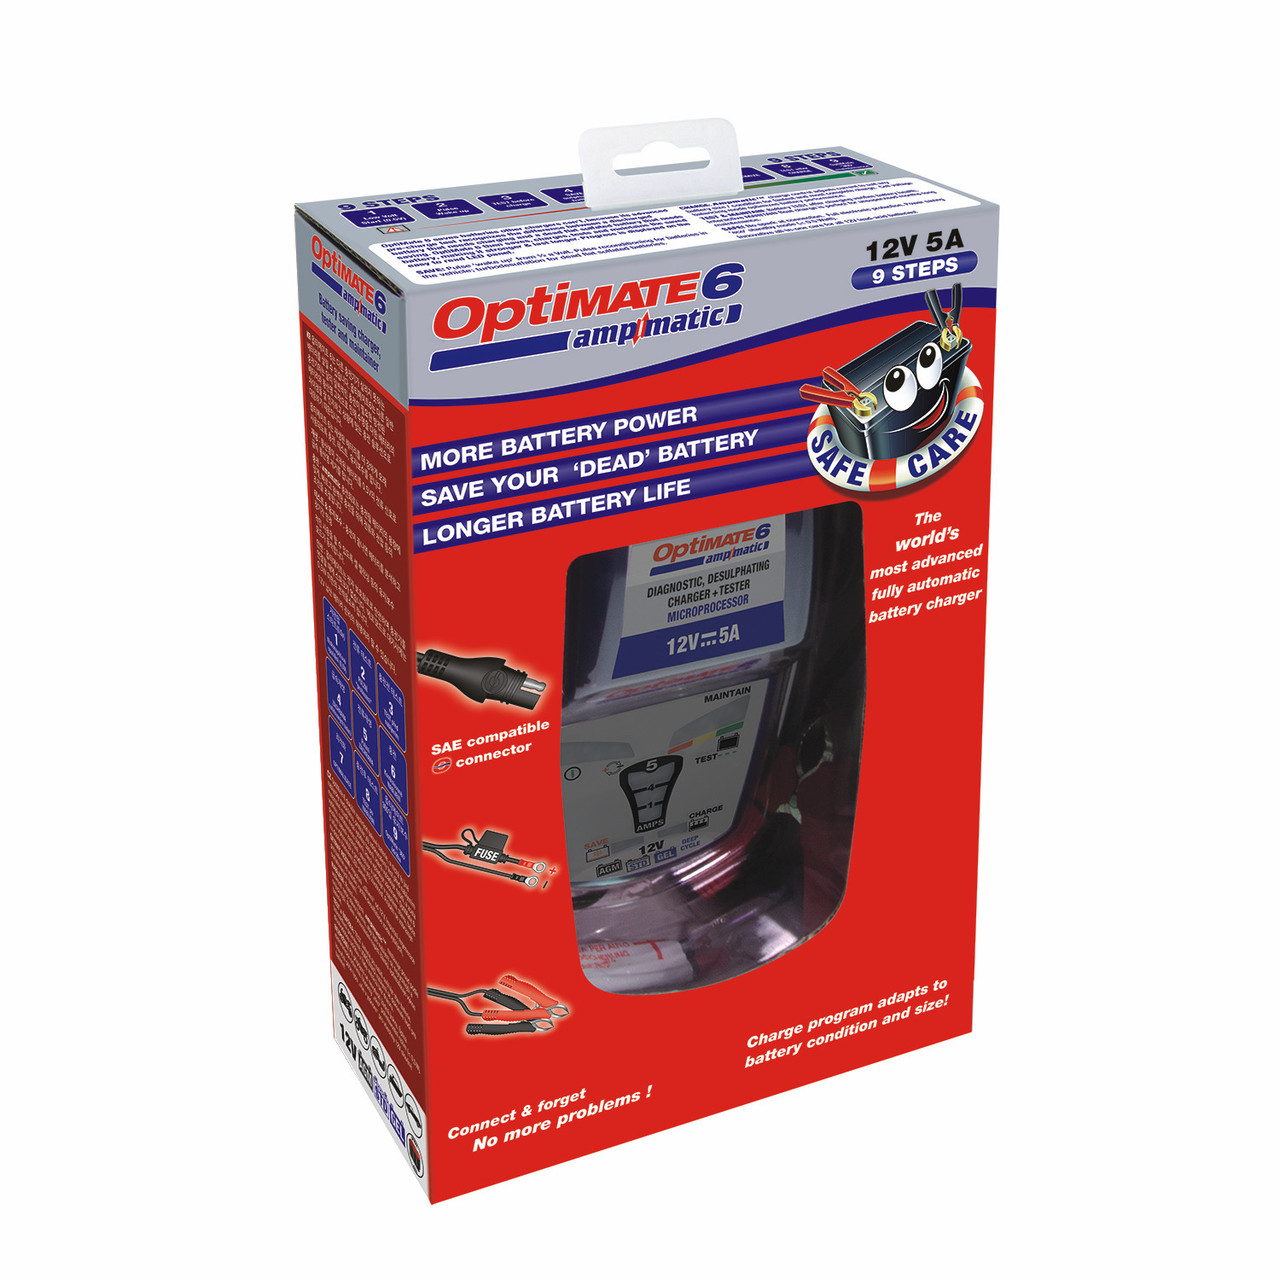 Battery Charger TECHMATE optimate 6 - Buy now, get 18% off